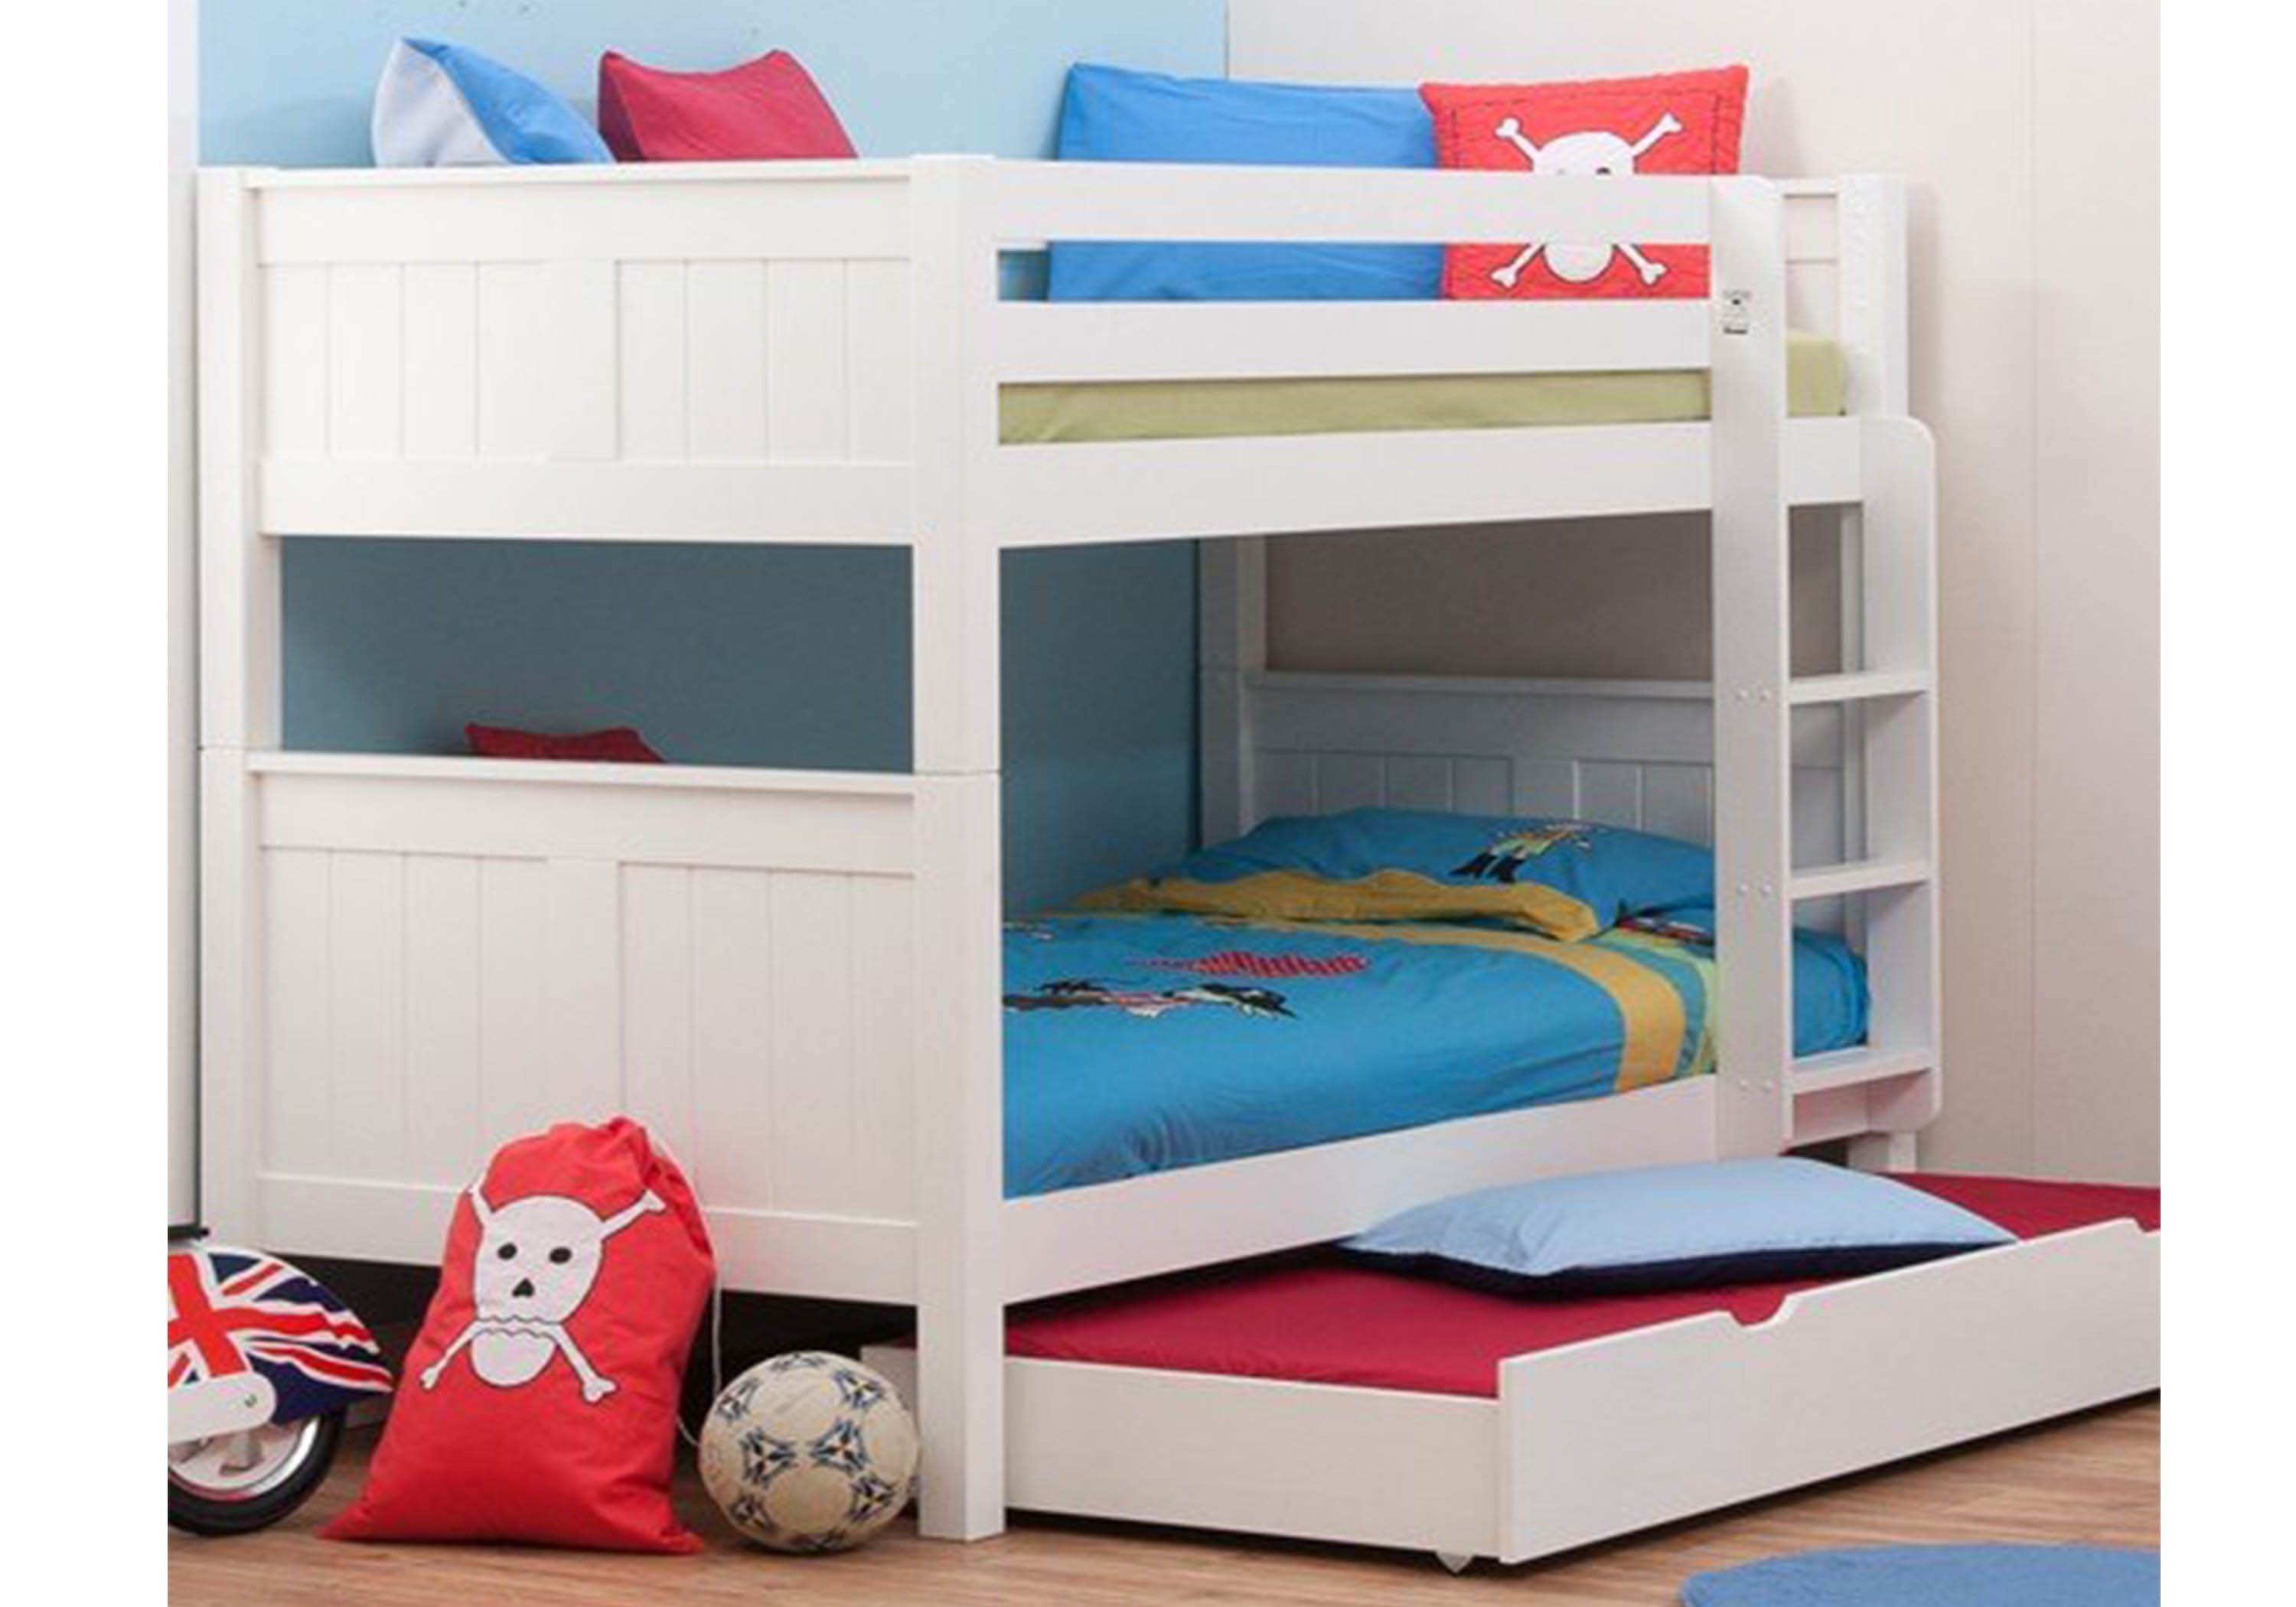 Stompa Classic Kids White Bunk Bed, Childrens Full Size Bunk Beds